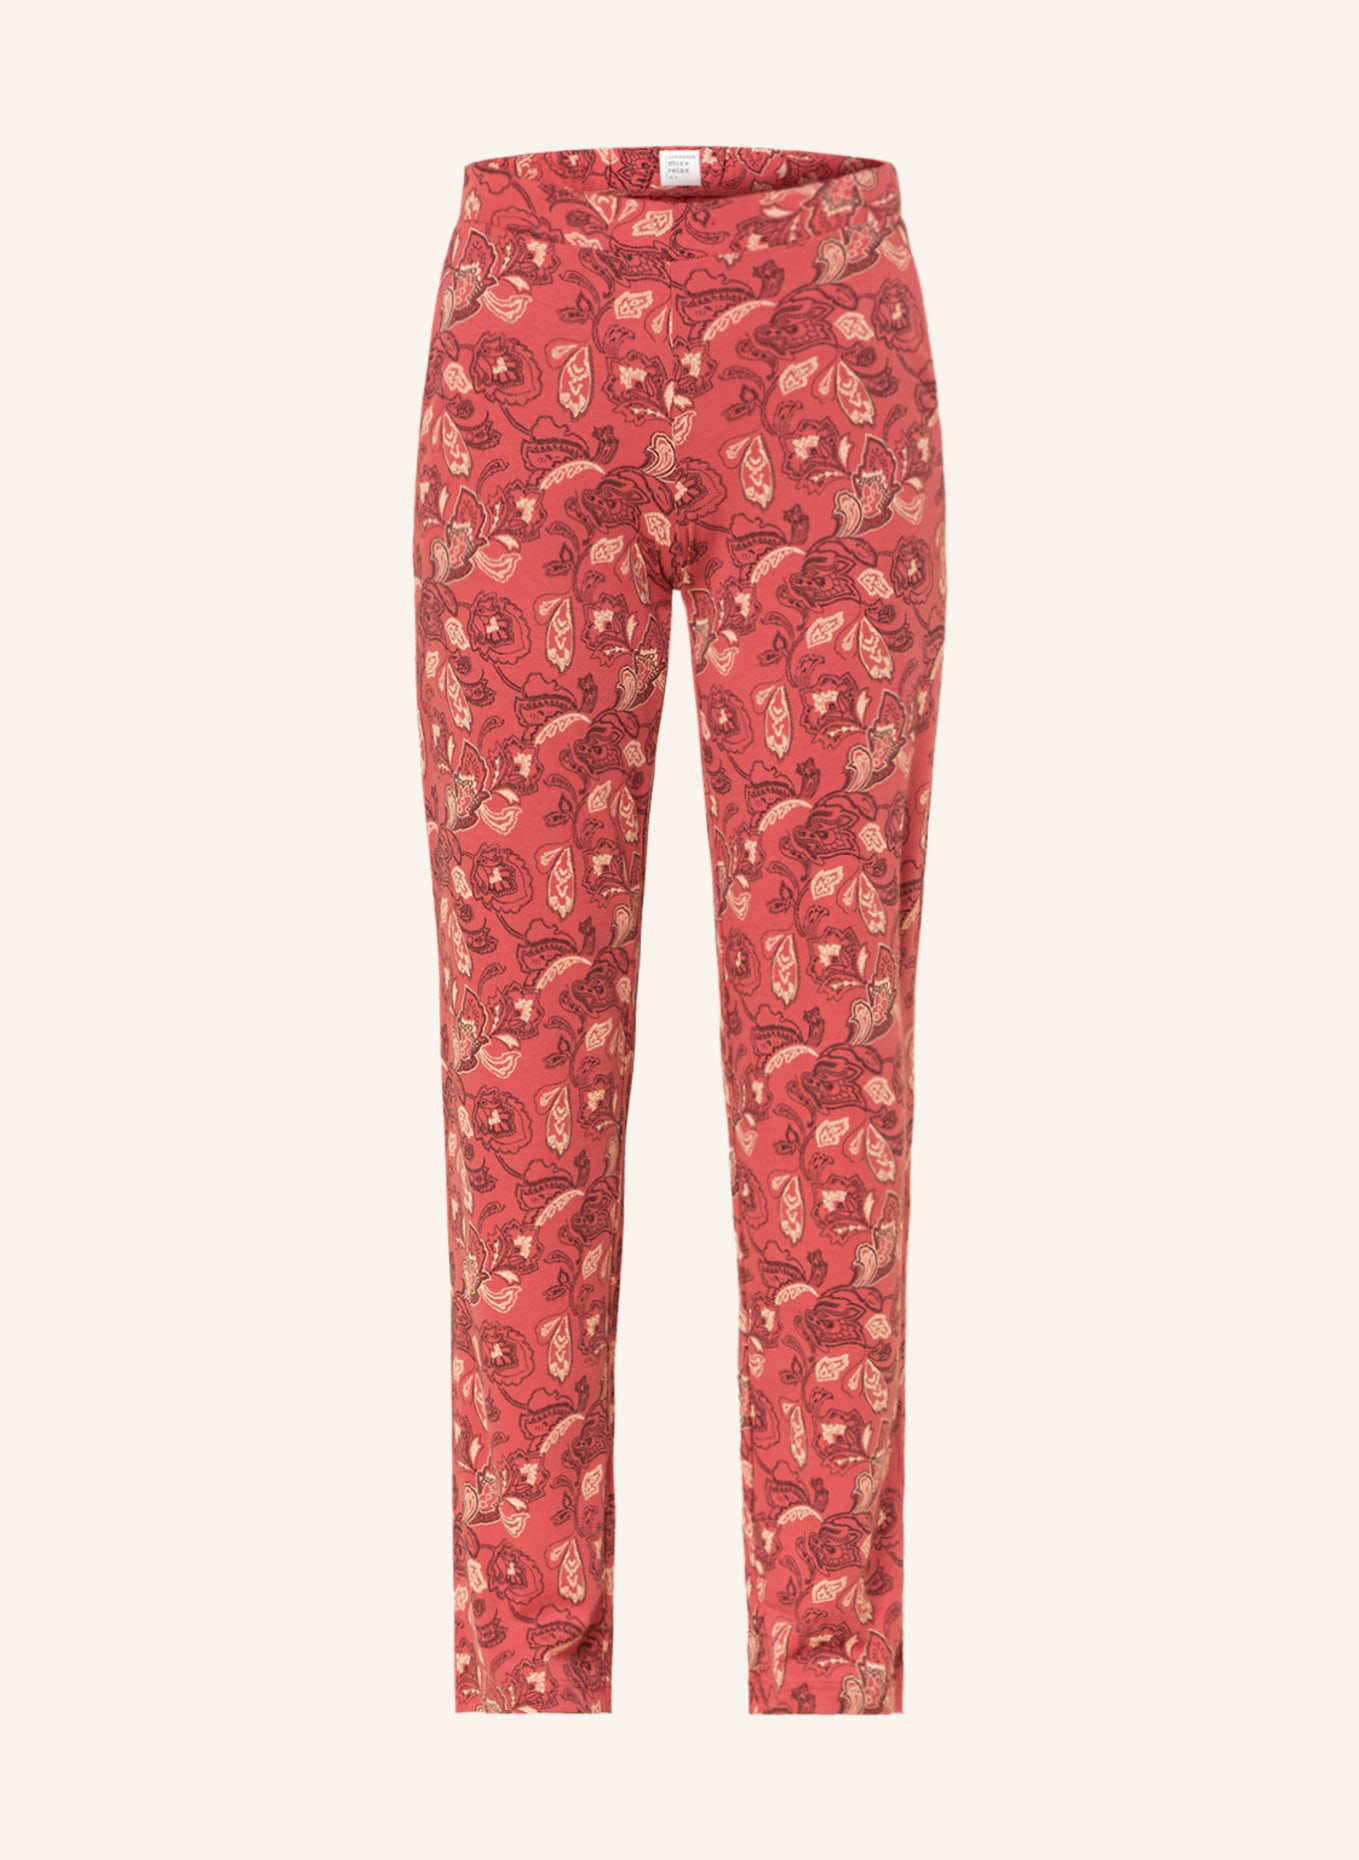 SCHIESSER Pajama pants MIX+RELAX, Color: LIGHT RED/ LIGHT YELLOW/ DARK BROWN (Image 1)